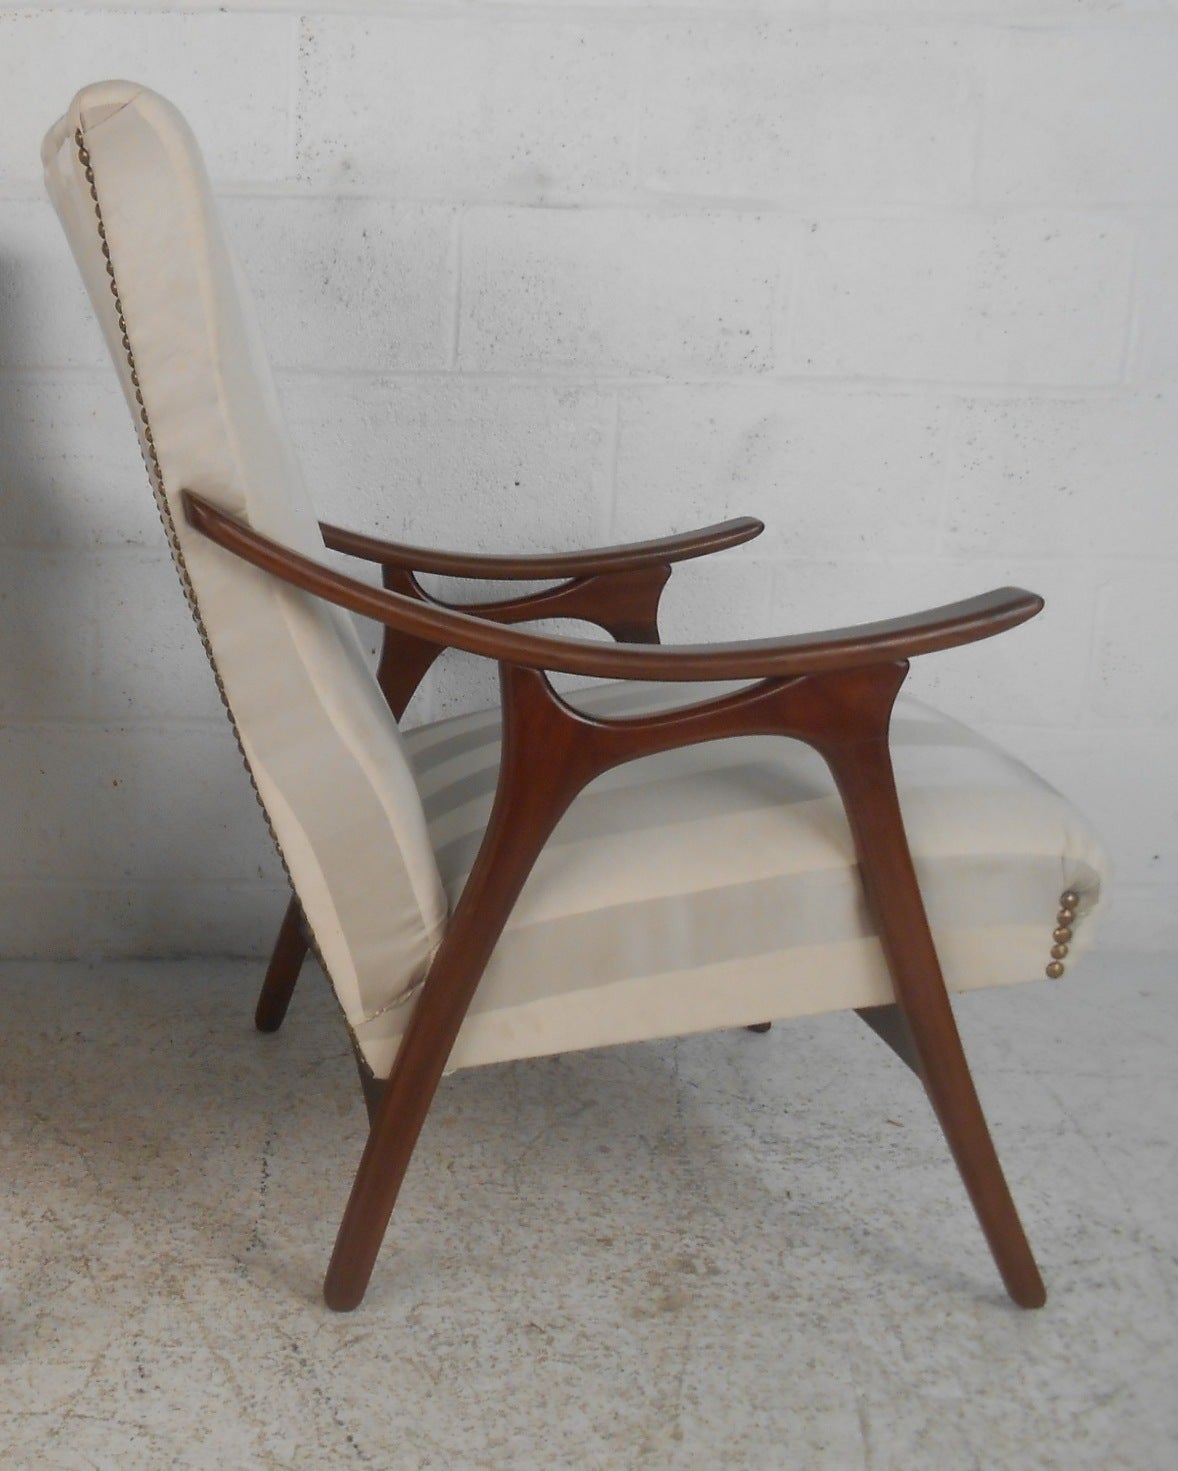 Sculptural Vintage Mid-Century Modern Armchairs In Good Condition For Sale In Brooklyn, NY